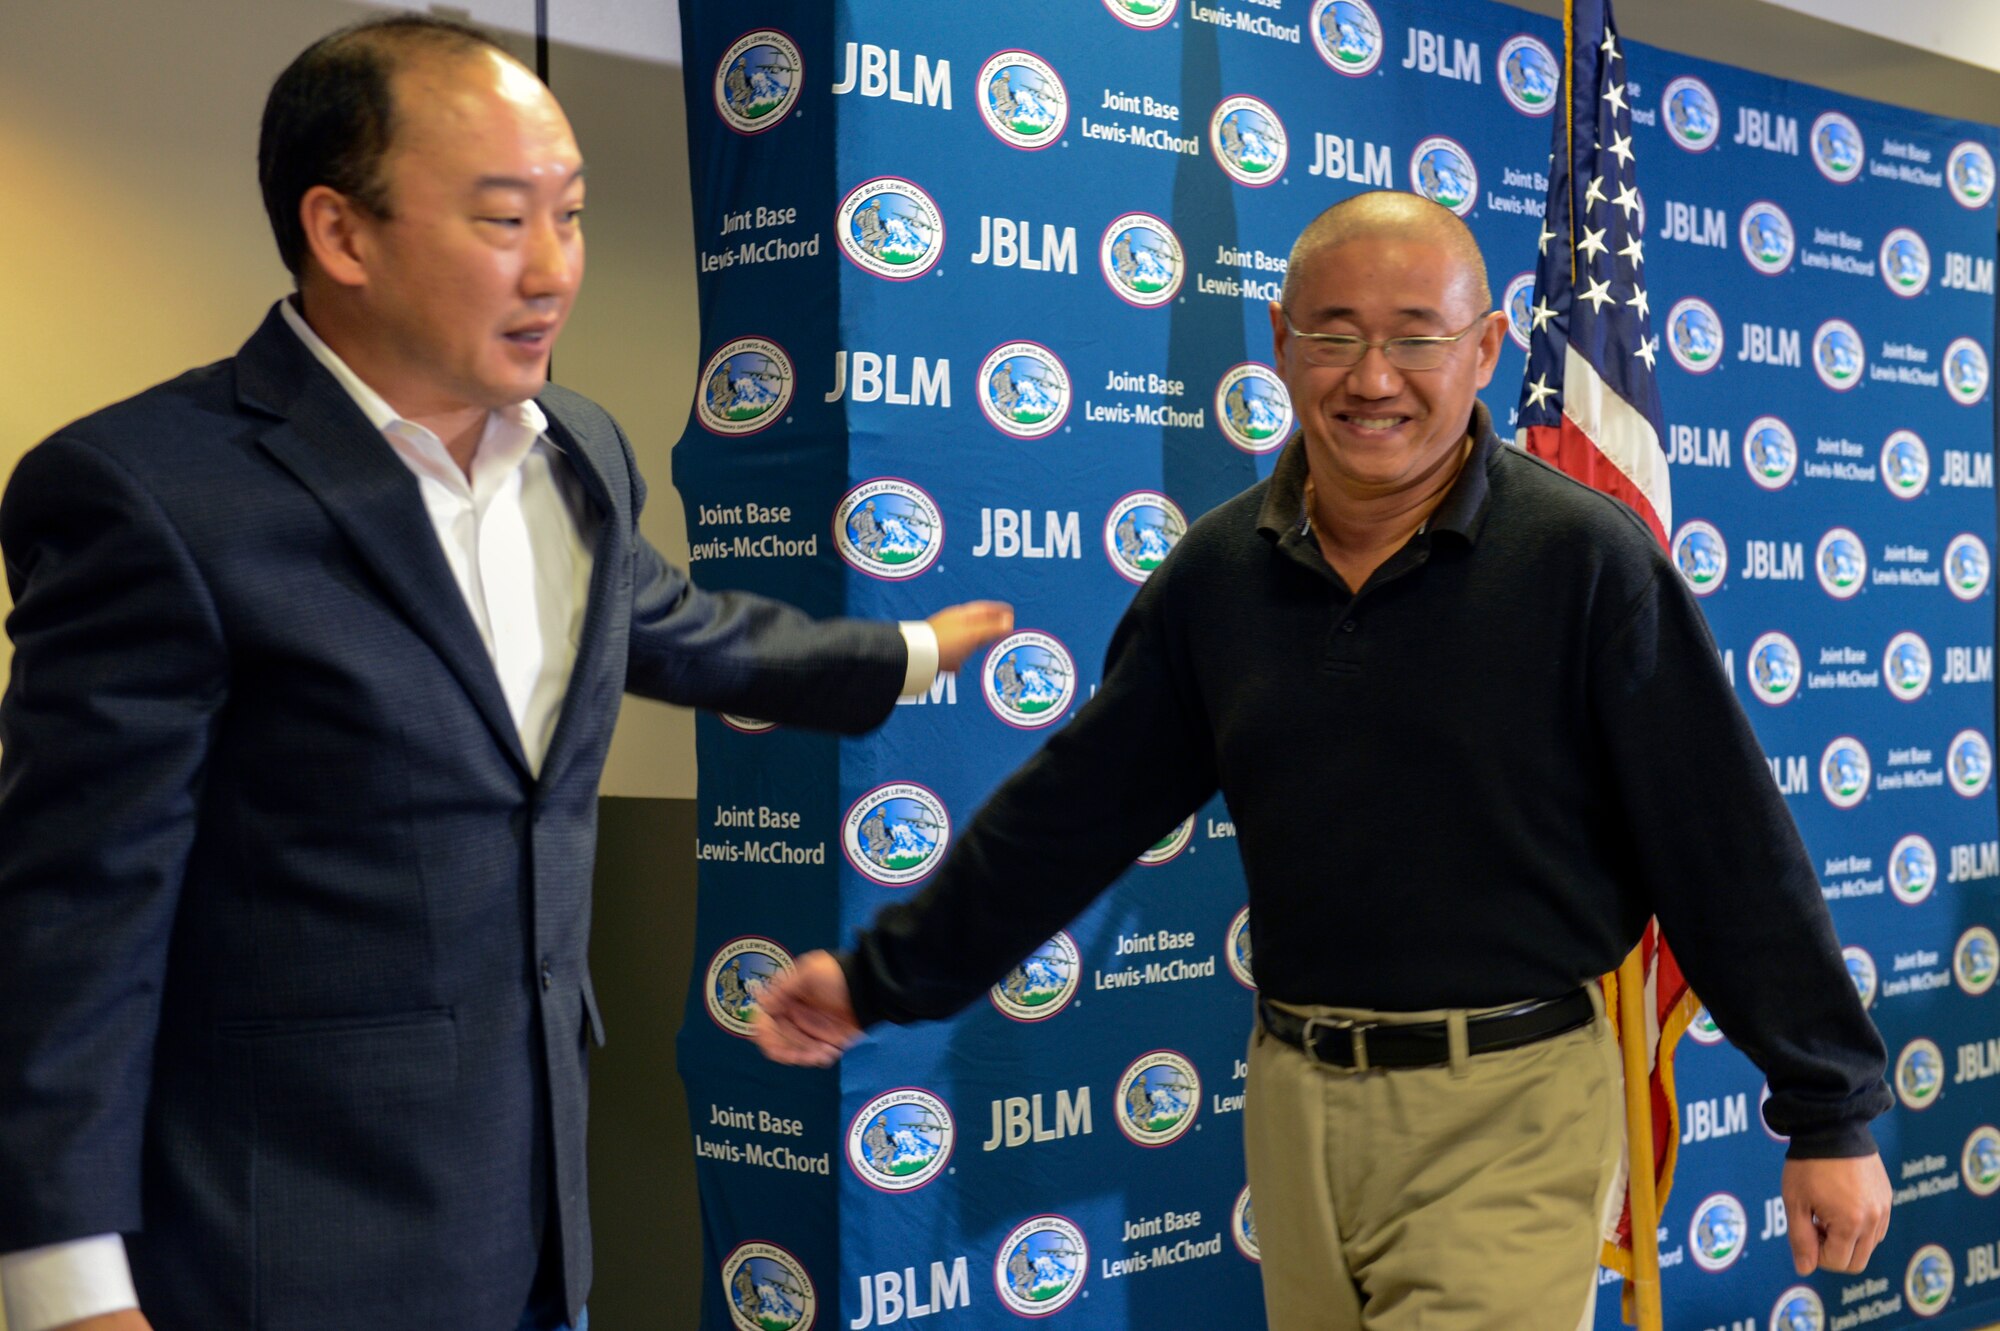 Kenneth Bae, one of the last two American citizens imprisoned in North Korea, smiles after speaking to the media Nov. 8th, 2014, at Joint Base Lewis-McChord, Wash., upon his return to the United States after spending more than two years in a North Korean prison. Bae was accused of plotting to bring down the North Korean government through religious activities late in 2012 and was sentenced to 15 years of hard labor. (U.S. Air Force photo/Staff Sgt. Russ Jackson)